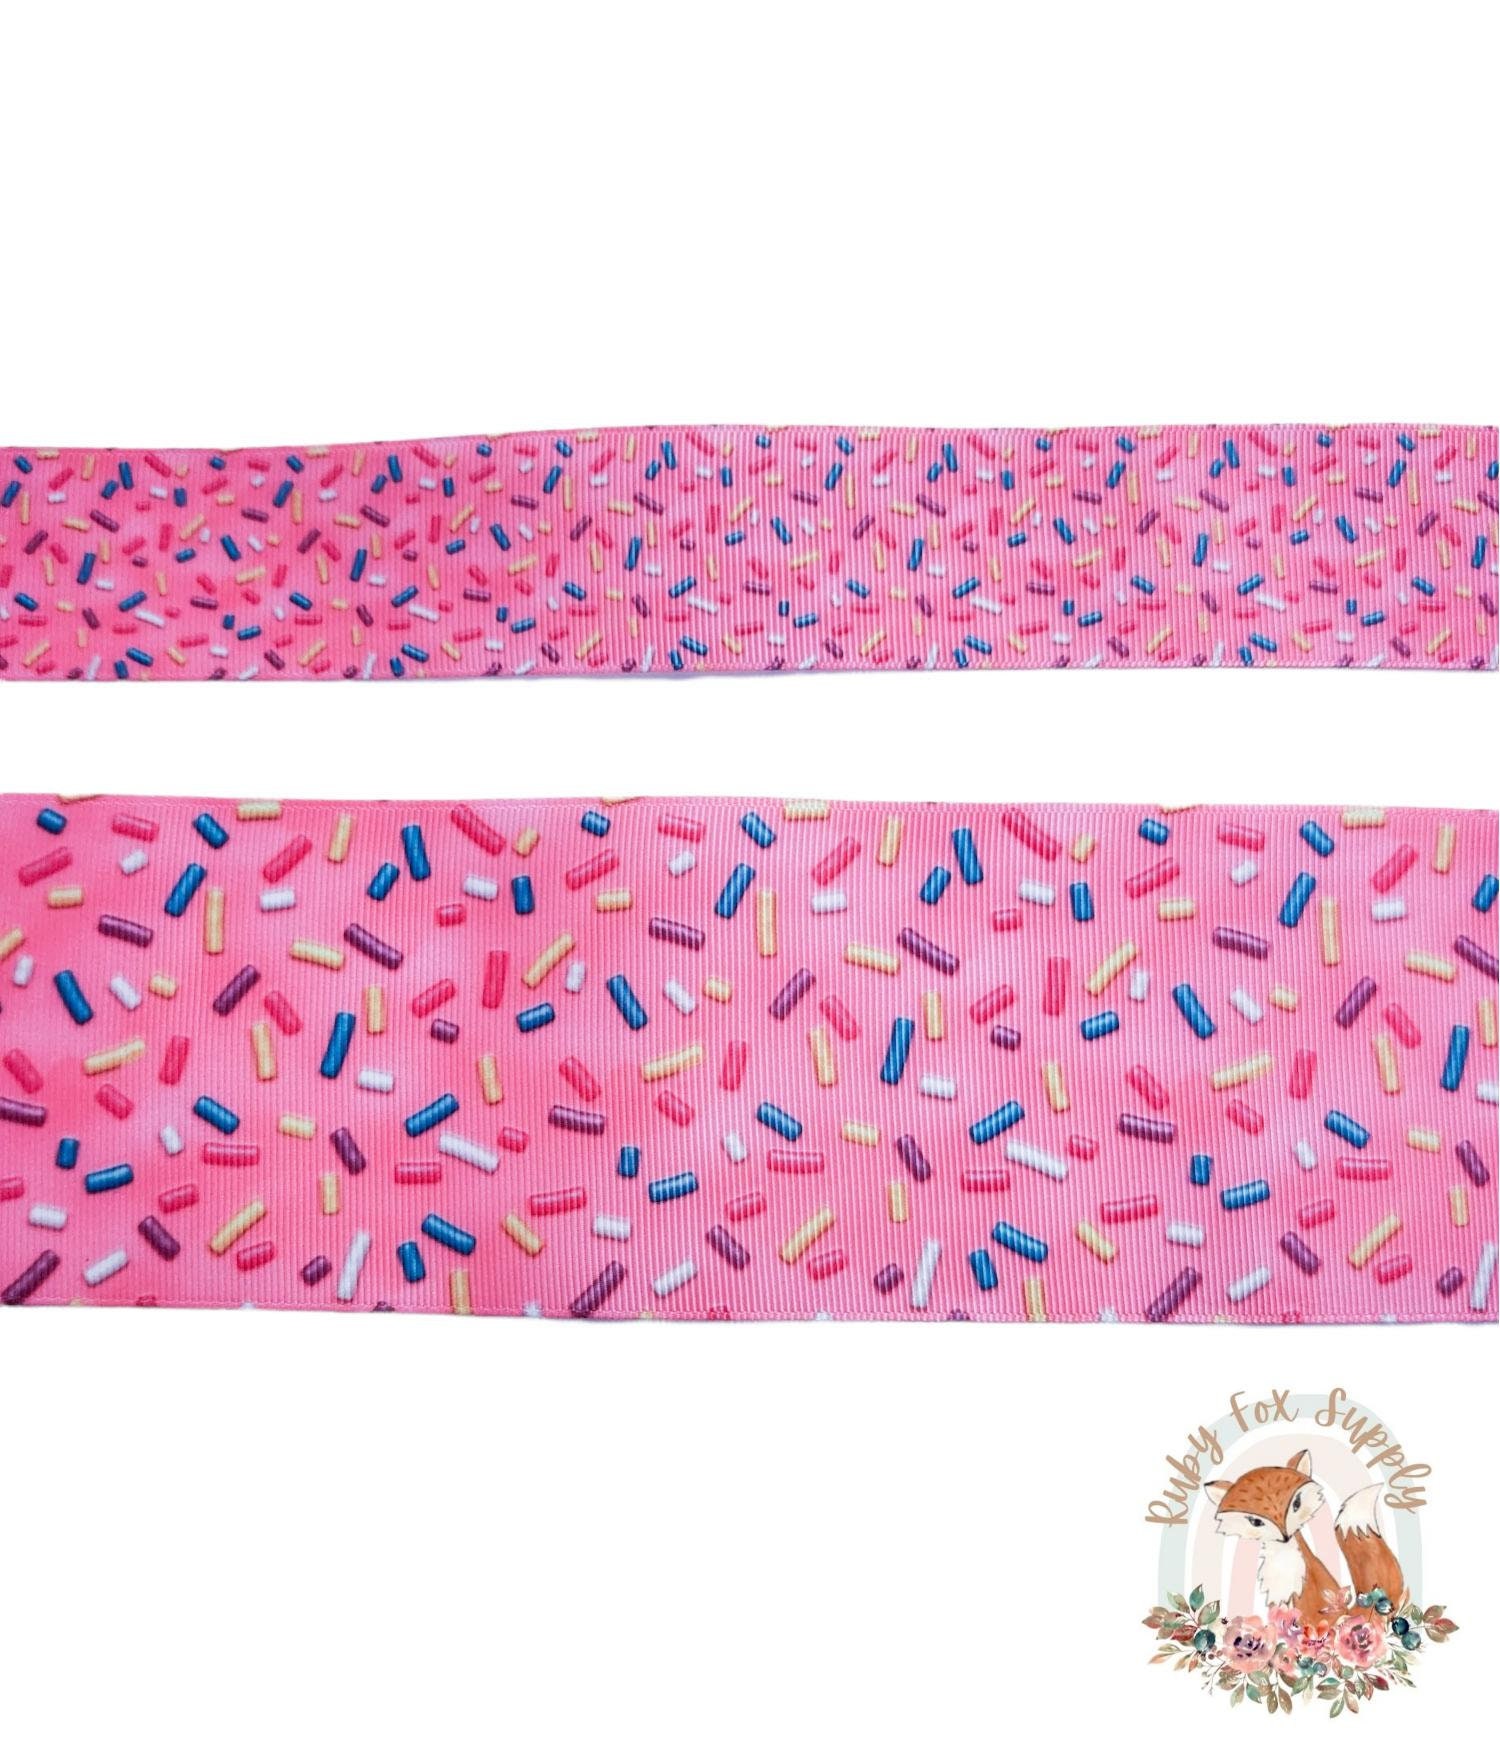 Buy 75mm Wide Bean Pink Ribbon for Gift Wrapping,22M 3Inch Ribbon